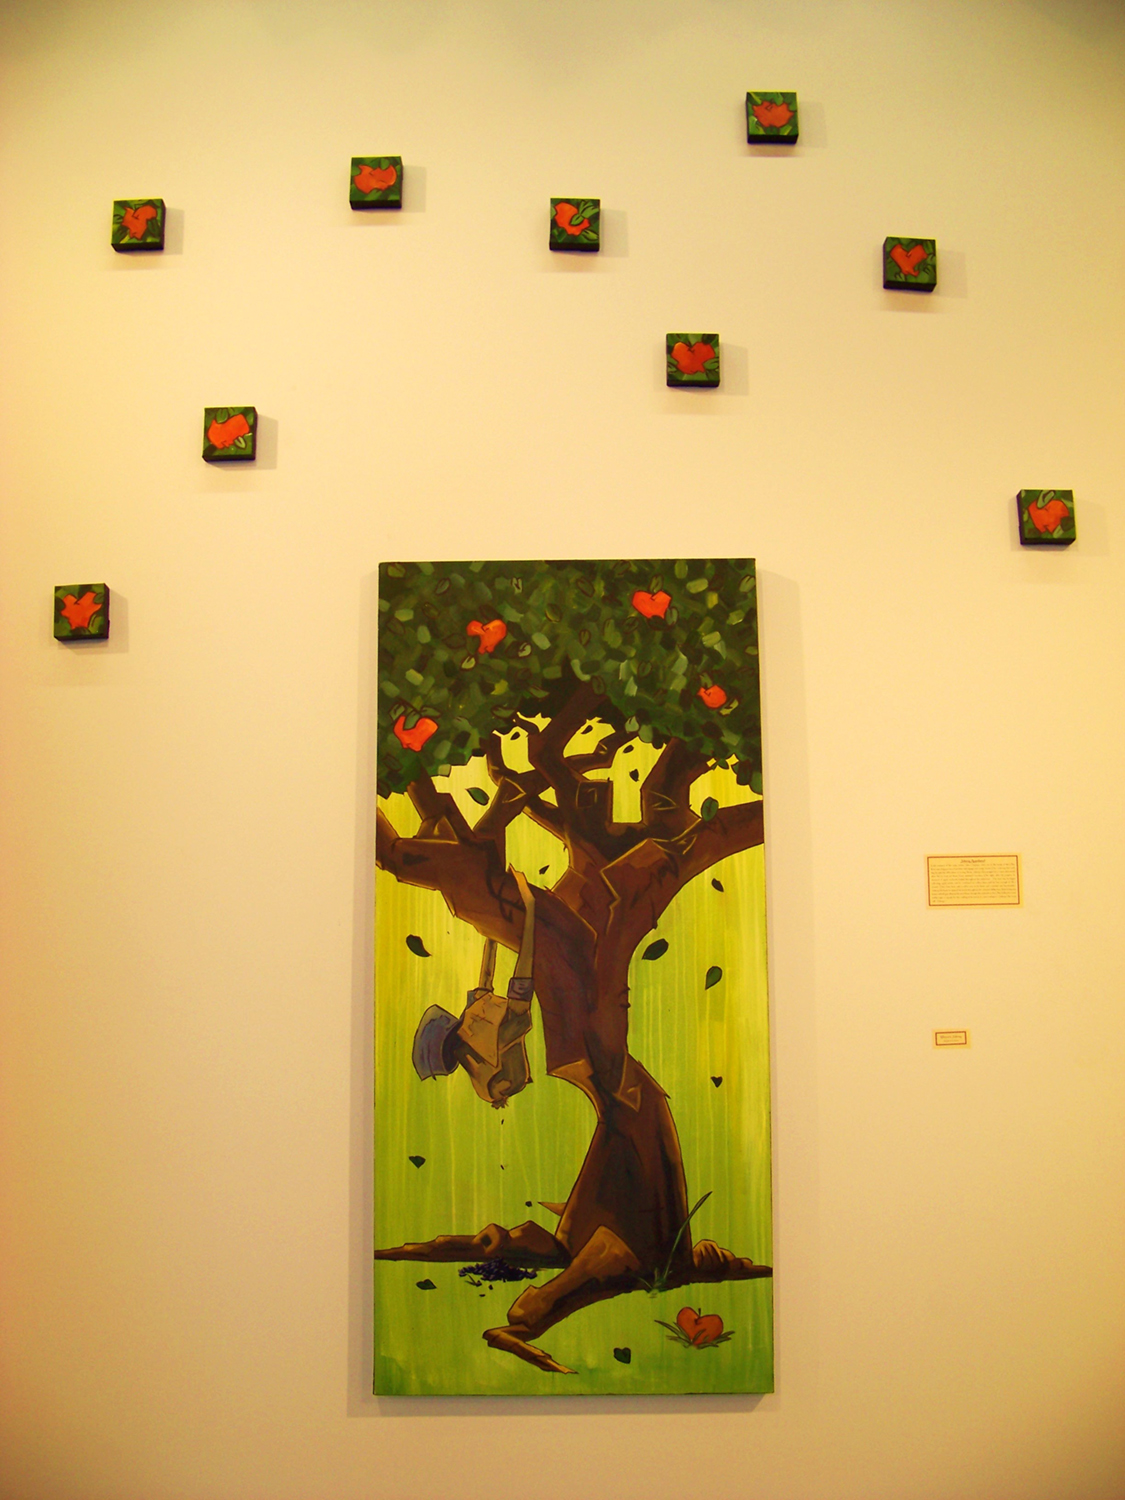 A large painting of an apple tree with smaller paintings of apples scattered over the gallery wall around it. Photo credit: Lucas Elliott